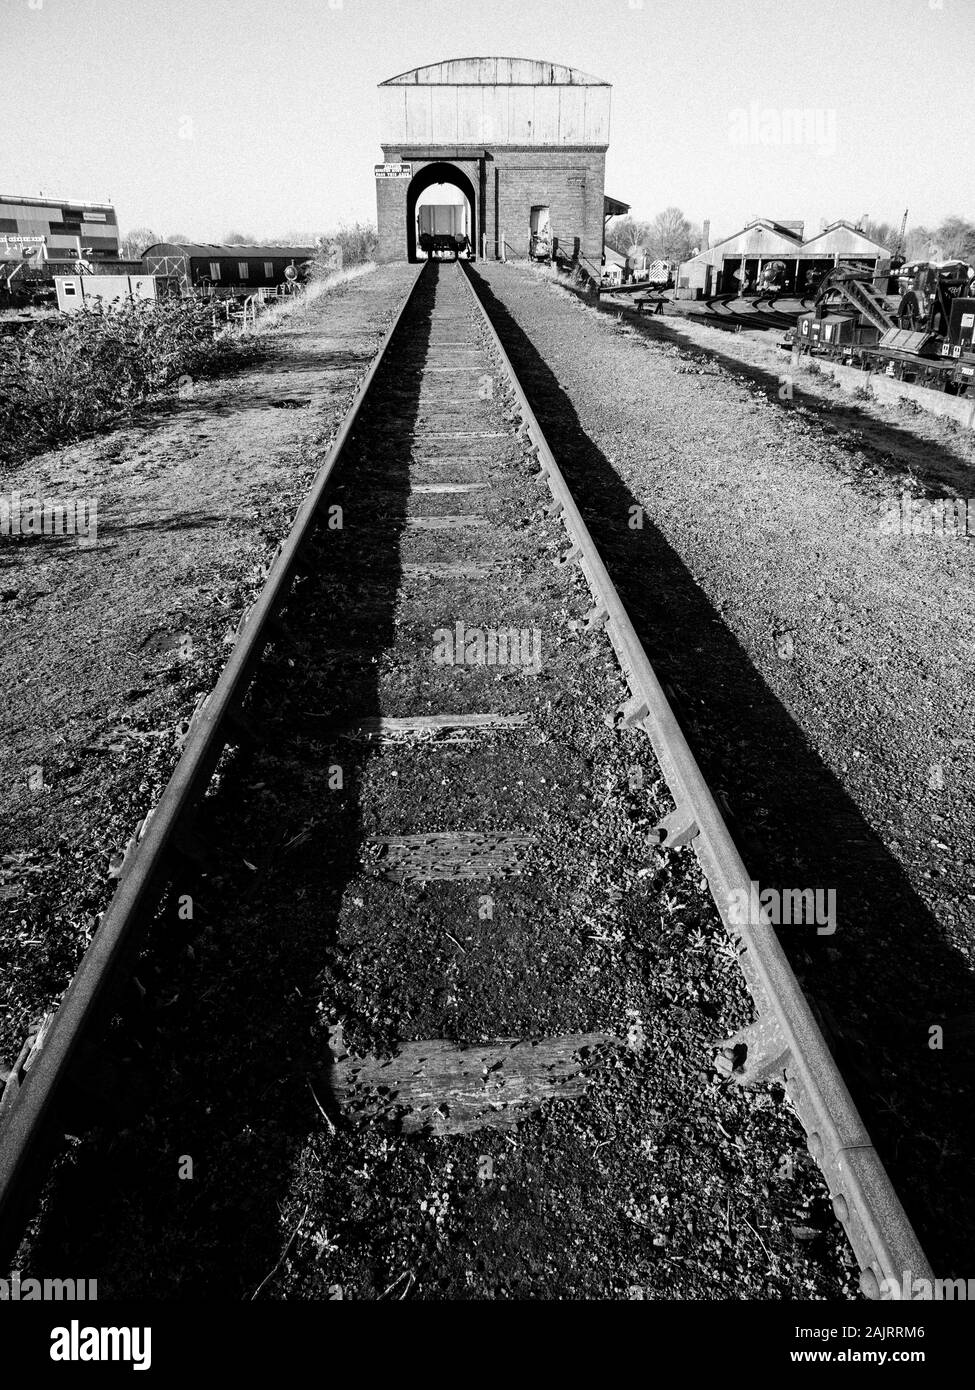 Black and White, Landscape, Coal Stage for Supplying Trains With Water and Cole, Didcot Railway Centre, Didcot, Oxfordshire, England, UK, GB. Stock Photo